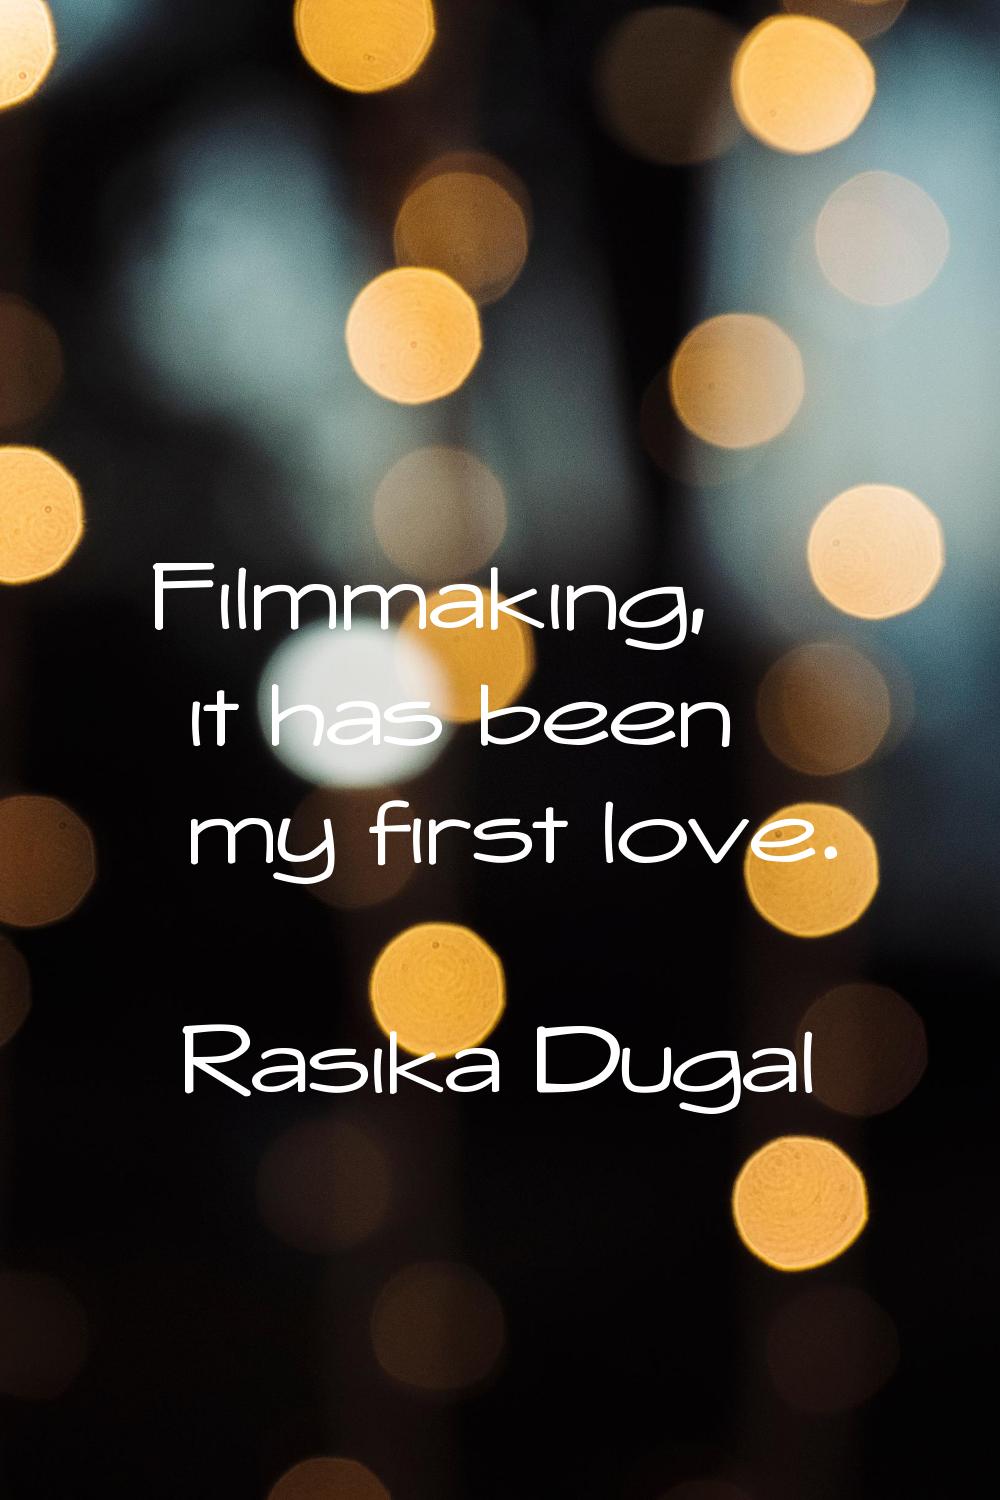 Filmmaking, it has been my first love.